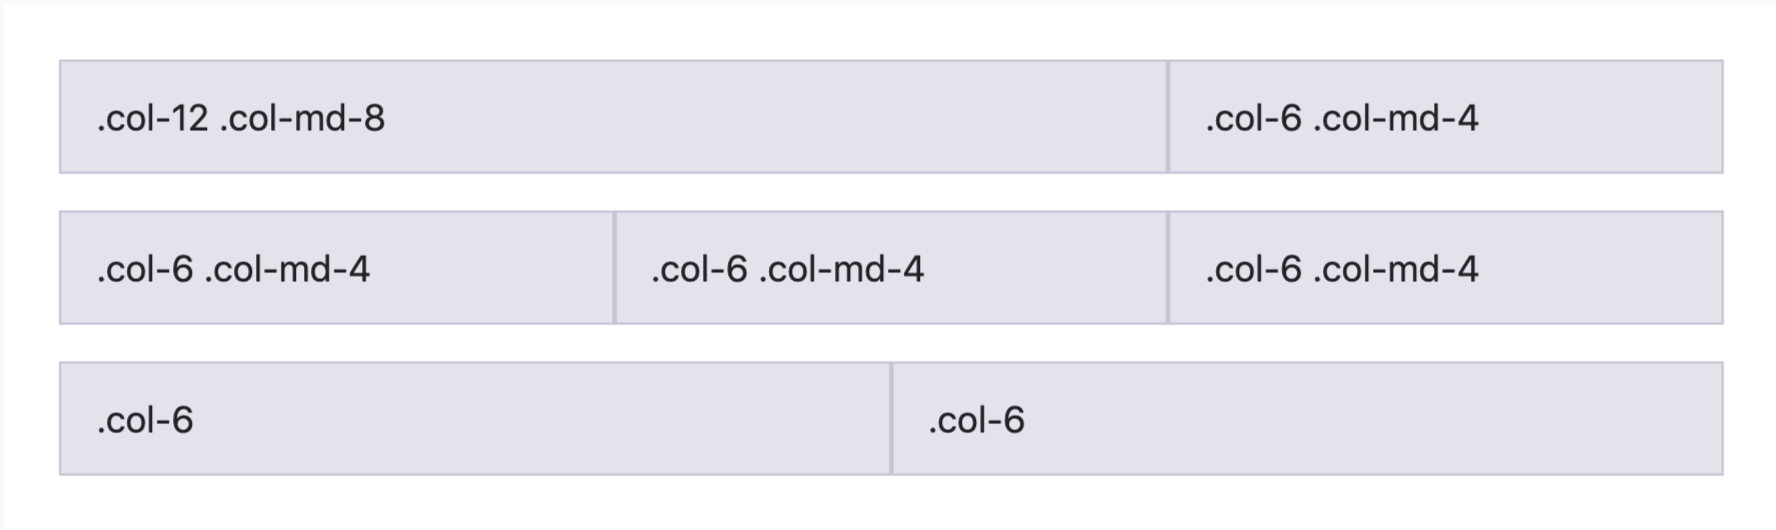 Design responsive layout system using only 40 lines —Know how to implement  col-sm-12 and col-md-6 | by realdennis | Medium